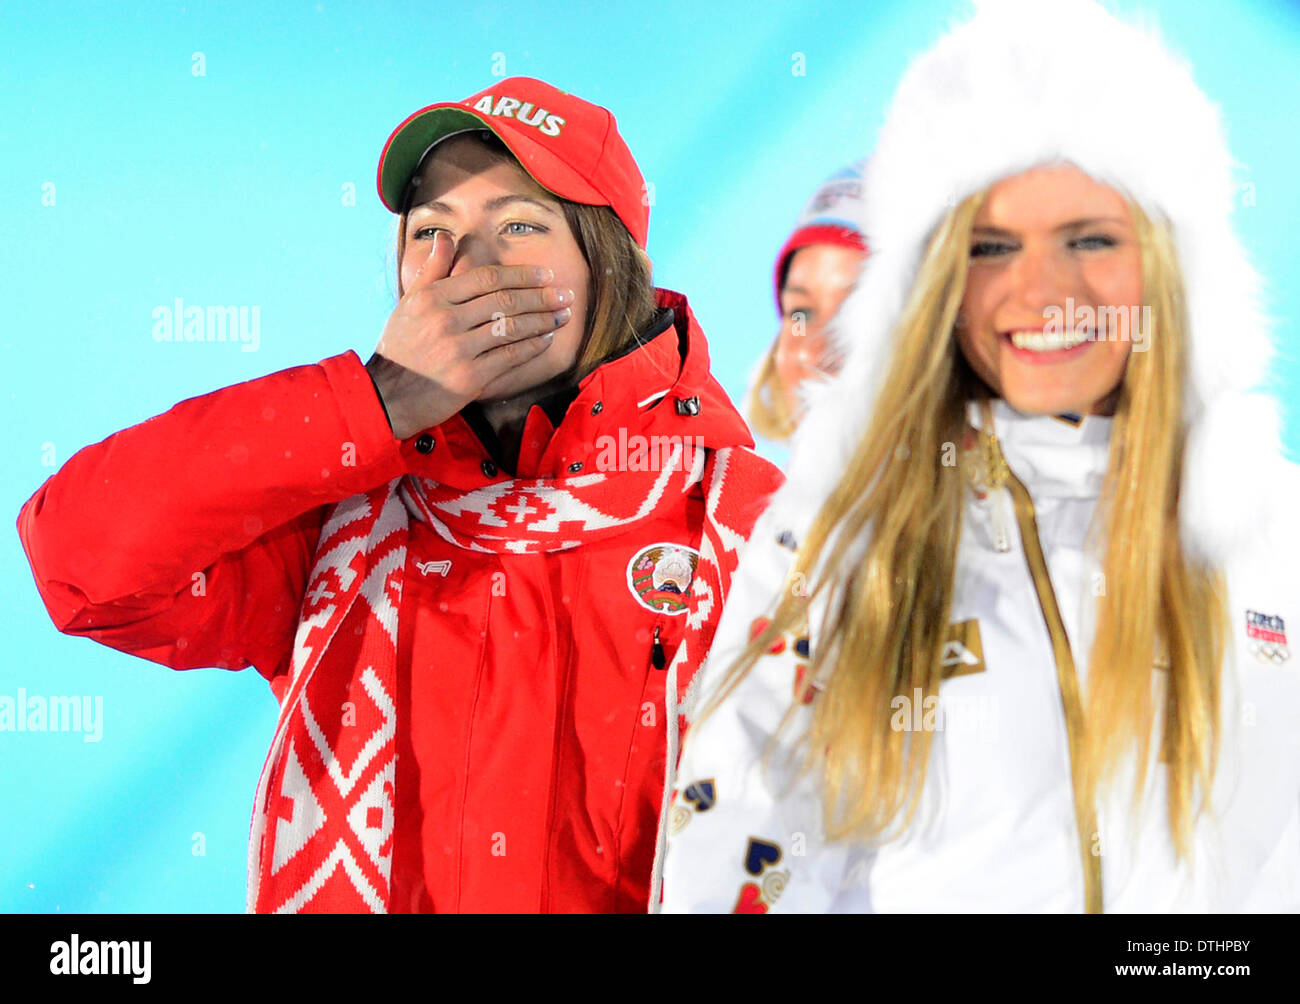 Sochi, Russia. 18th Feb, 2014. Left to right: Medalist in the women's biathlon 12.5K mass start, Gabriela Soukalova of the Czech Republic, silver, and Darya Domracheva of Belarus, gold, pictured during the medals ceremony at the 2014 Winter Olympics in Sochi, Russia, Tuesday, February 18, 2014. Credit:  Roman Vondrous/CTK Photo/Alamy Live News Stock Photo